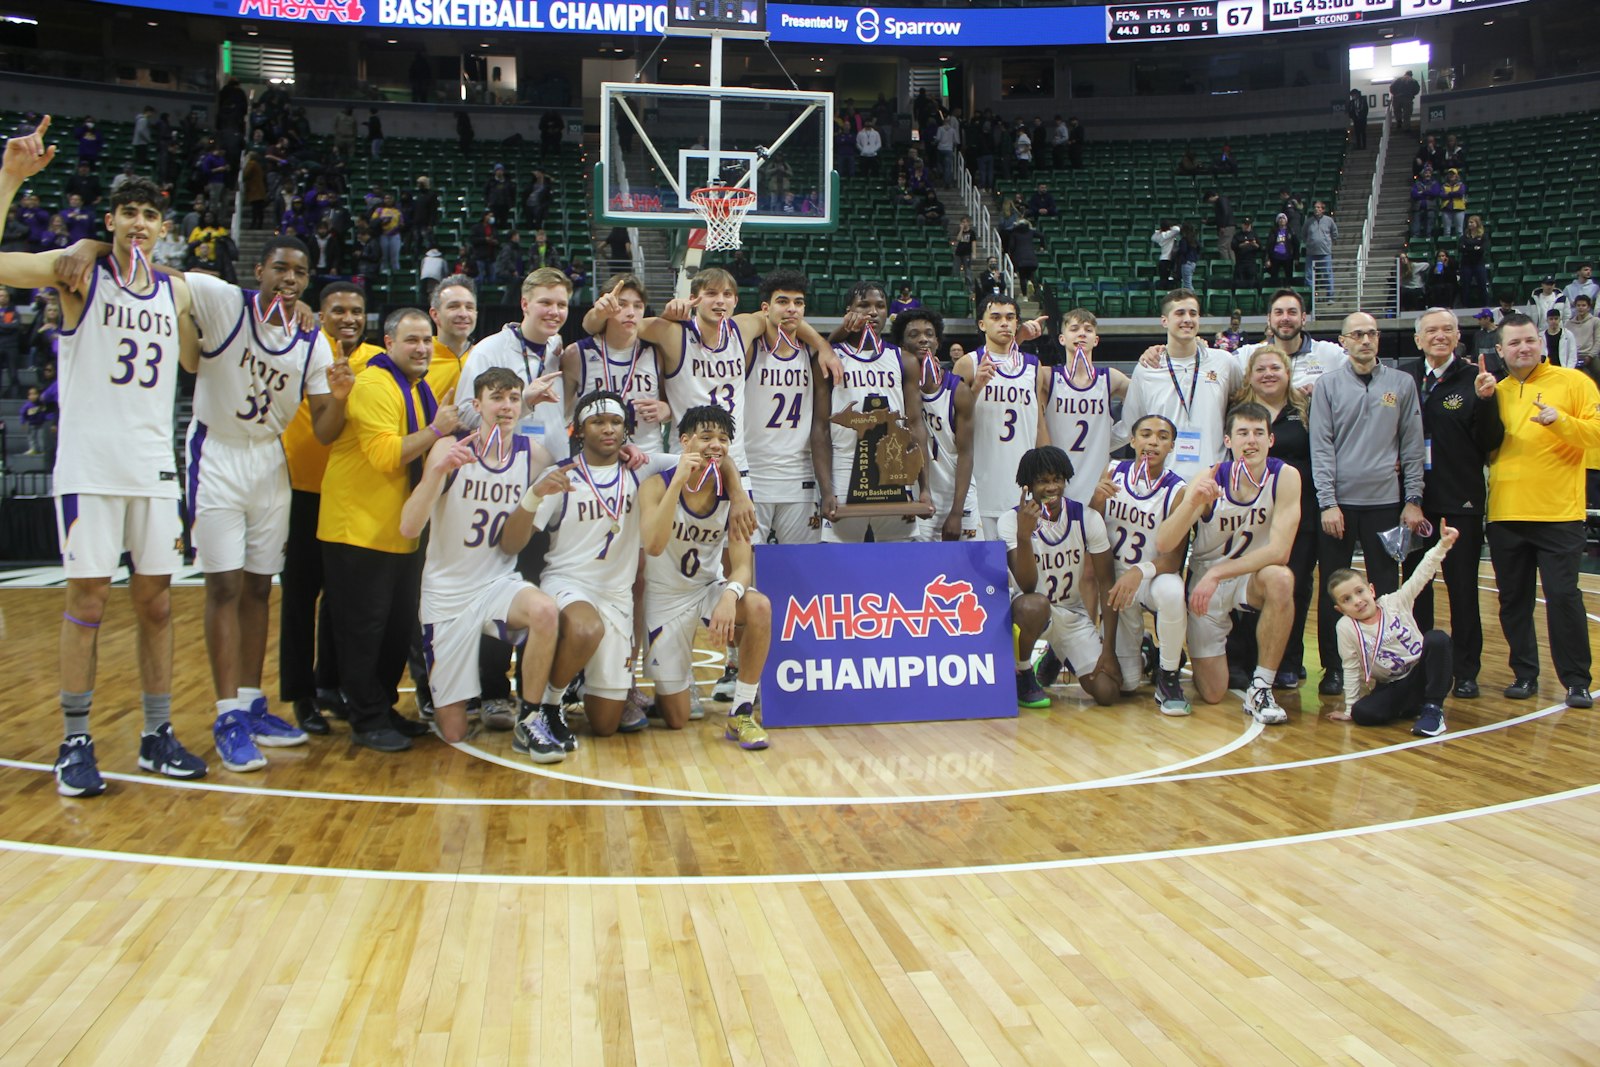 Warren De La Salle celebrates its state title in basketball after defeating defending champion Grand Blanc. It had been 40 years since the last championship game for the Pilots, who finished fourth in the Catholic League this winter.